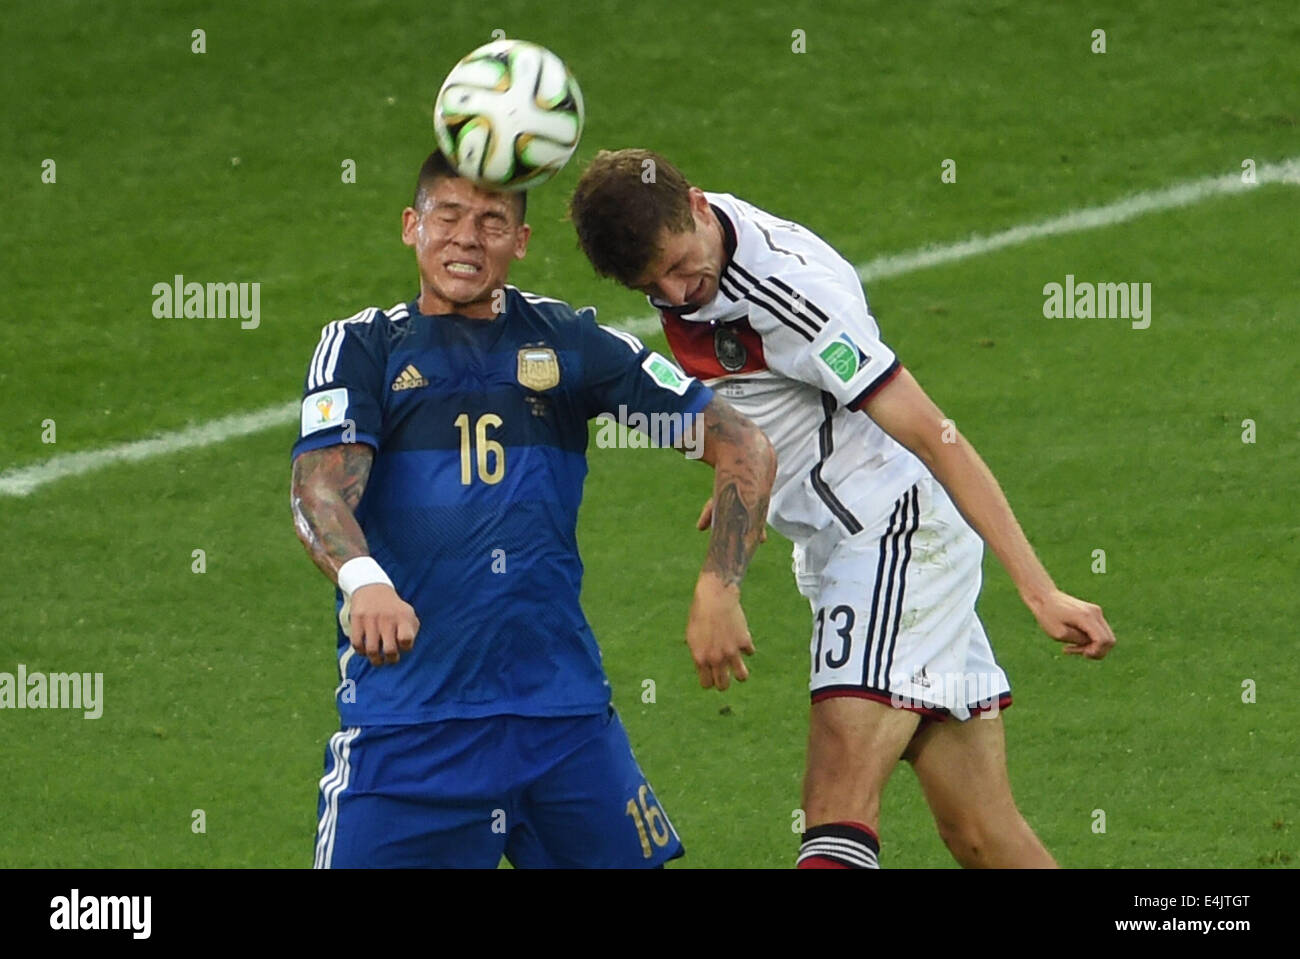 Rio De Janeiro, Brazil. 13th July, 2014. Germany's Thomas Muller competes for a header with Argentina's Marcos Rojo during the final match between Germany and Argentina of 2014 FIFA World Cup at the Estadio do Maracana Stadium in Rio de Janeiro, Brazil, on July 13, 2014. Credit:  Li Ga/Xinhua/Alamy Live News Stock Photo